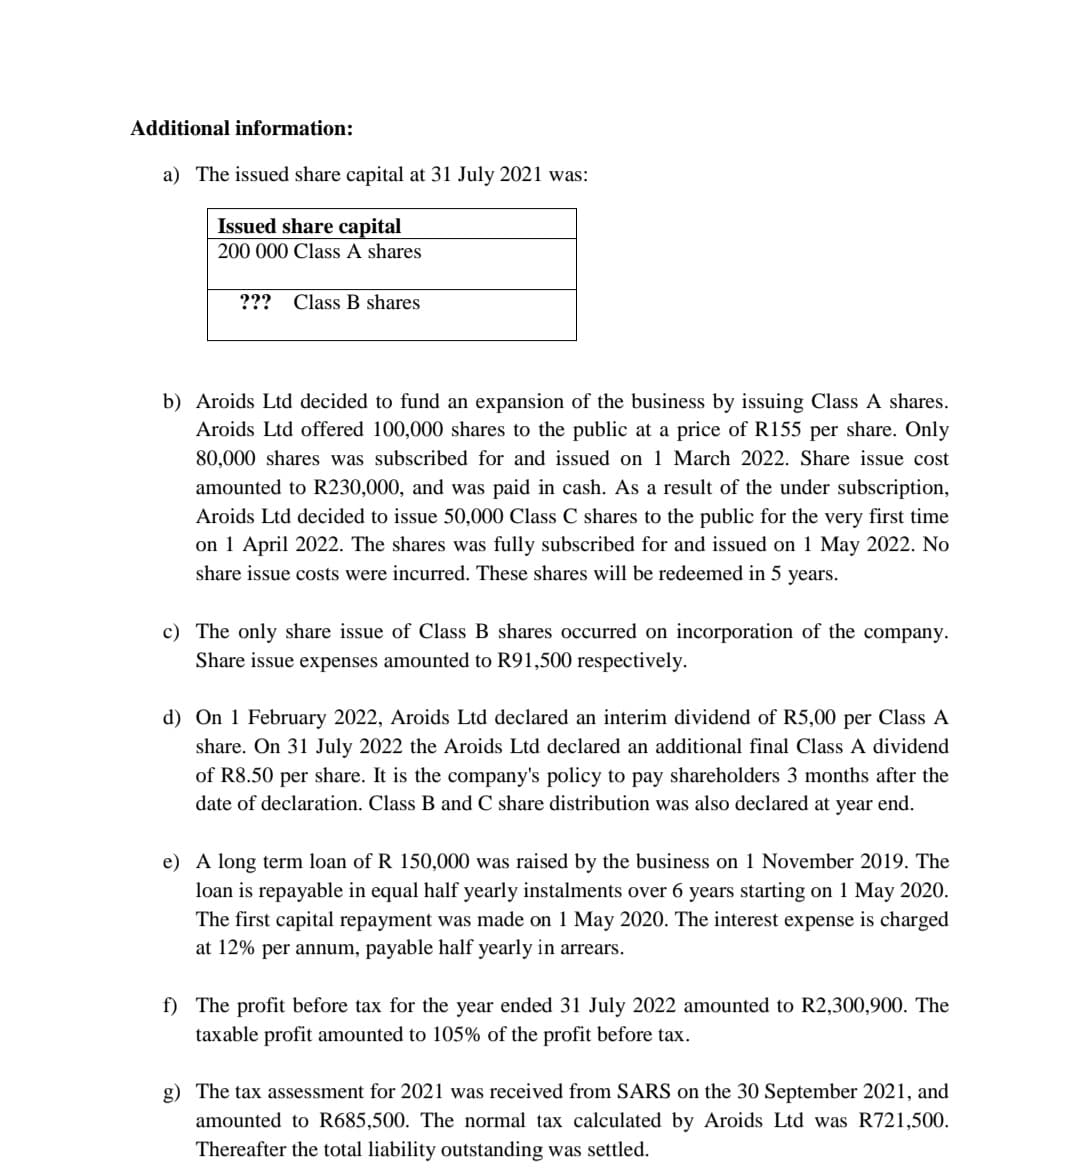 Additional information:
a) The issued share capital at 31 July 2021 was:
Issued share capital
200 000 Class A shares
??? Class B shares
b) Aroids Ltd decided to fund an expansion of the business by issuing Class A shares.
Aroids Ltd offered 100,000 shares to the public at a price of R155 per share. Only
80,000 shares was subscribed for and issued on 1 March 2022. Share issue cost
amounted to R230,000, and was paid in cash. As a result of the under subscription,
Aroids Ltd decided to issue 50,000 Class C shares to the public for the very first time
on 1 April 2022. The shares was fully subscribed for and issued on 1 May 2022. No
share issue costs were incurred. These shares will be redeemed in 5 years.
c) The only share issue of Class B shares occurred on incorporation of the company.
Share issue expenses amounted to R91,500 respectively.
d) On 1 February 2022, Aroids Ltd declared an interim dividend of R5,00 per Class A
share. On 31 July 2022 the Aroids Ltd declared an additional final Class A dividend
of R8.50 per share. It is the company's policy to pay shareholders 3 months after the
date of declaration. Class B and C share distribution was also declared at year end.
e) A long term loan of R 150,000 was raised by the business on 1 November 2019. The
loan is repayable in equal half yearly instalments over 6 years starting on 1 May 2020.
The first capital repayment was made on 1 May 2020. The interest expense is charged
at 12% per annum, payable half yearly in arrears.
f) The profit before tax for the year ended 31 July 2022 amounted to R2,300,900. The
taxable profit amounted to 105% of the profit before tax.
g) The tax assessment for 2021 was received from SARS on the 30 September 2021, and
amounted to R685,500. The normal tax calculated by Aroids Ltd was R721,500.
Thereafter the total liability outstanding was settled.